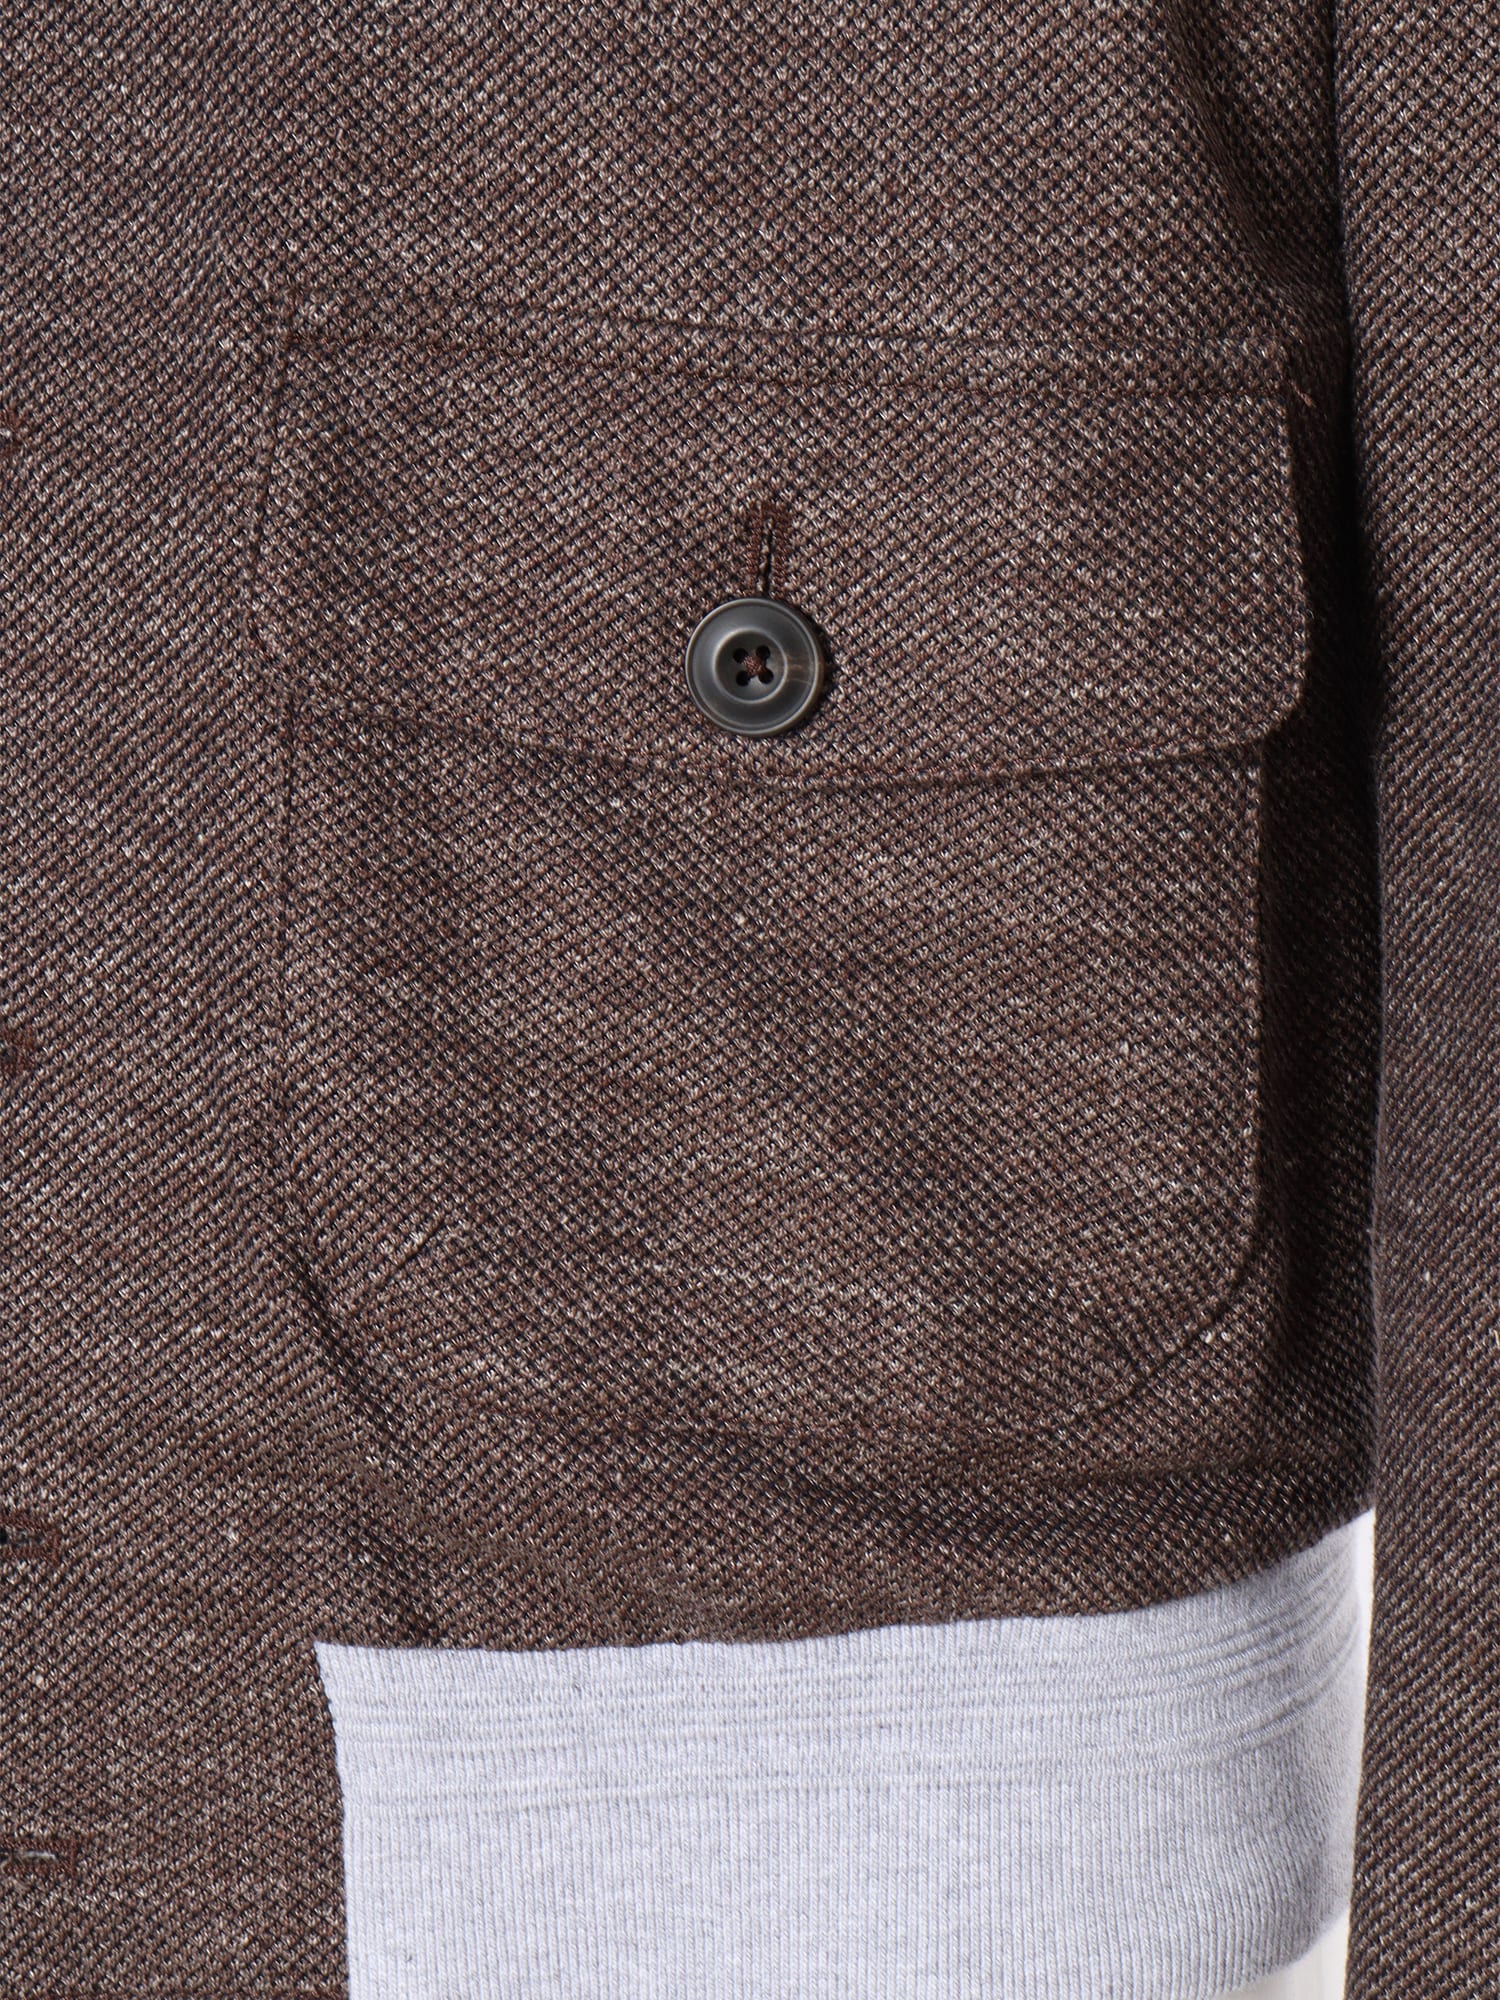 Shop L.b.m 1911 Brown Jacket With Pockets